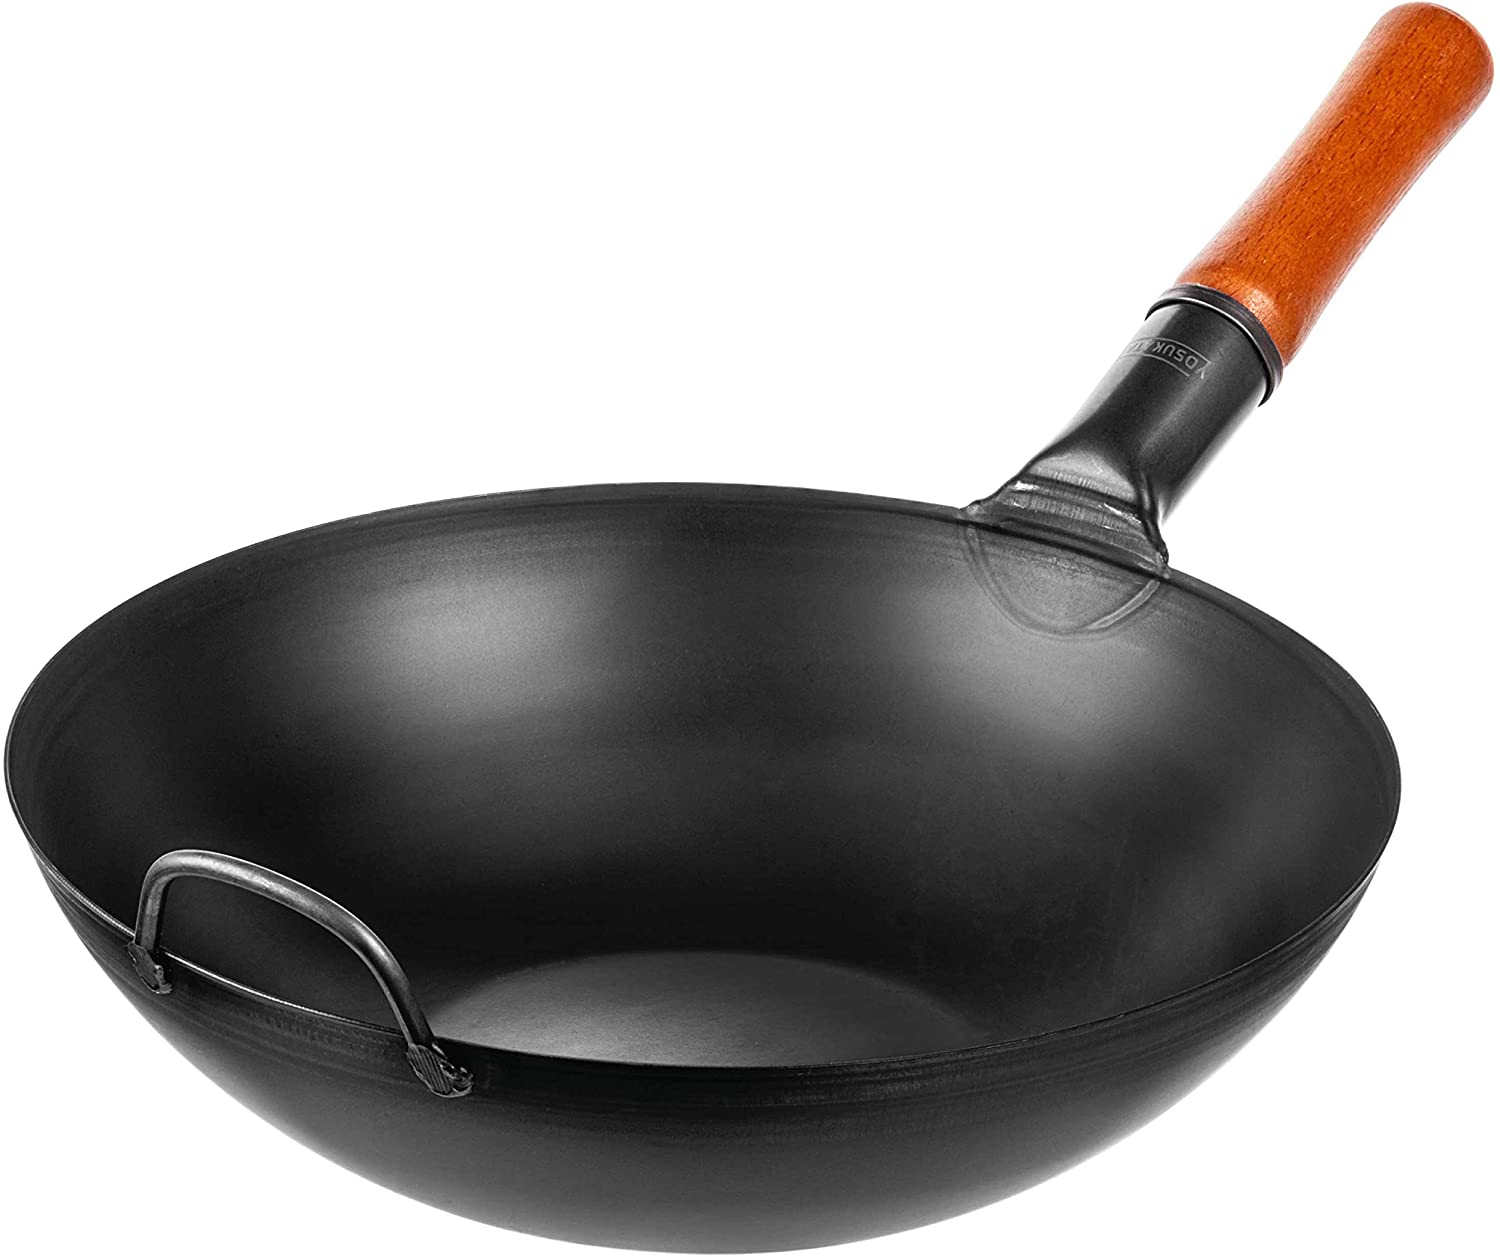 Carbon Steel Wok Flat Bottom Chinese Food Cooking Frying Pan Non Stick Cookware 